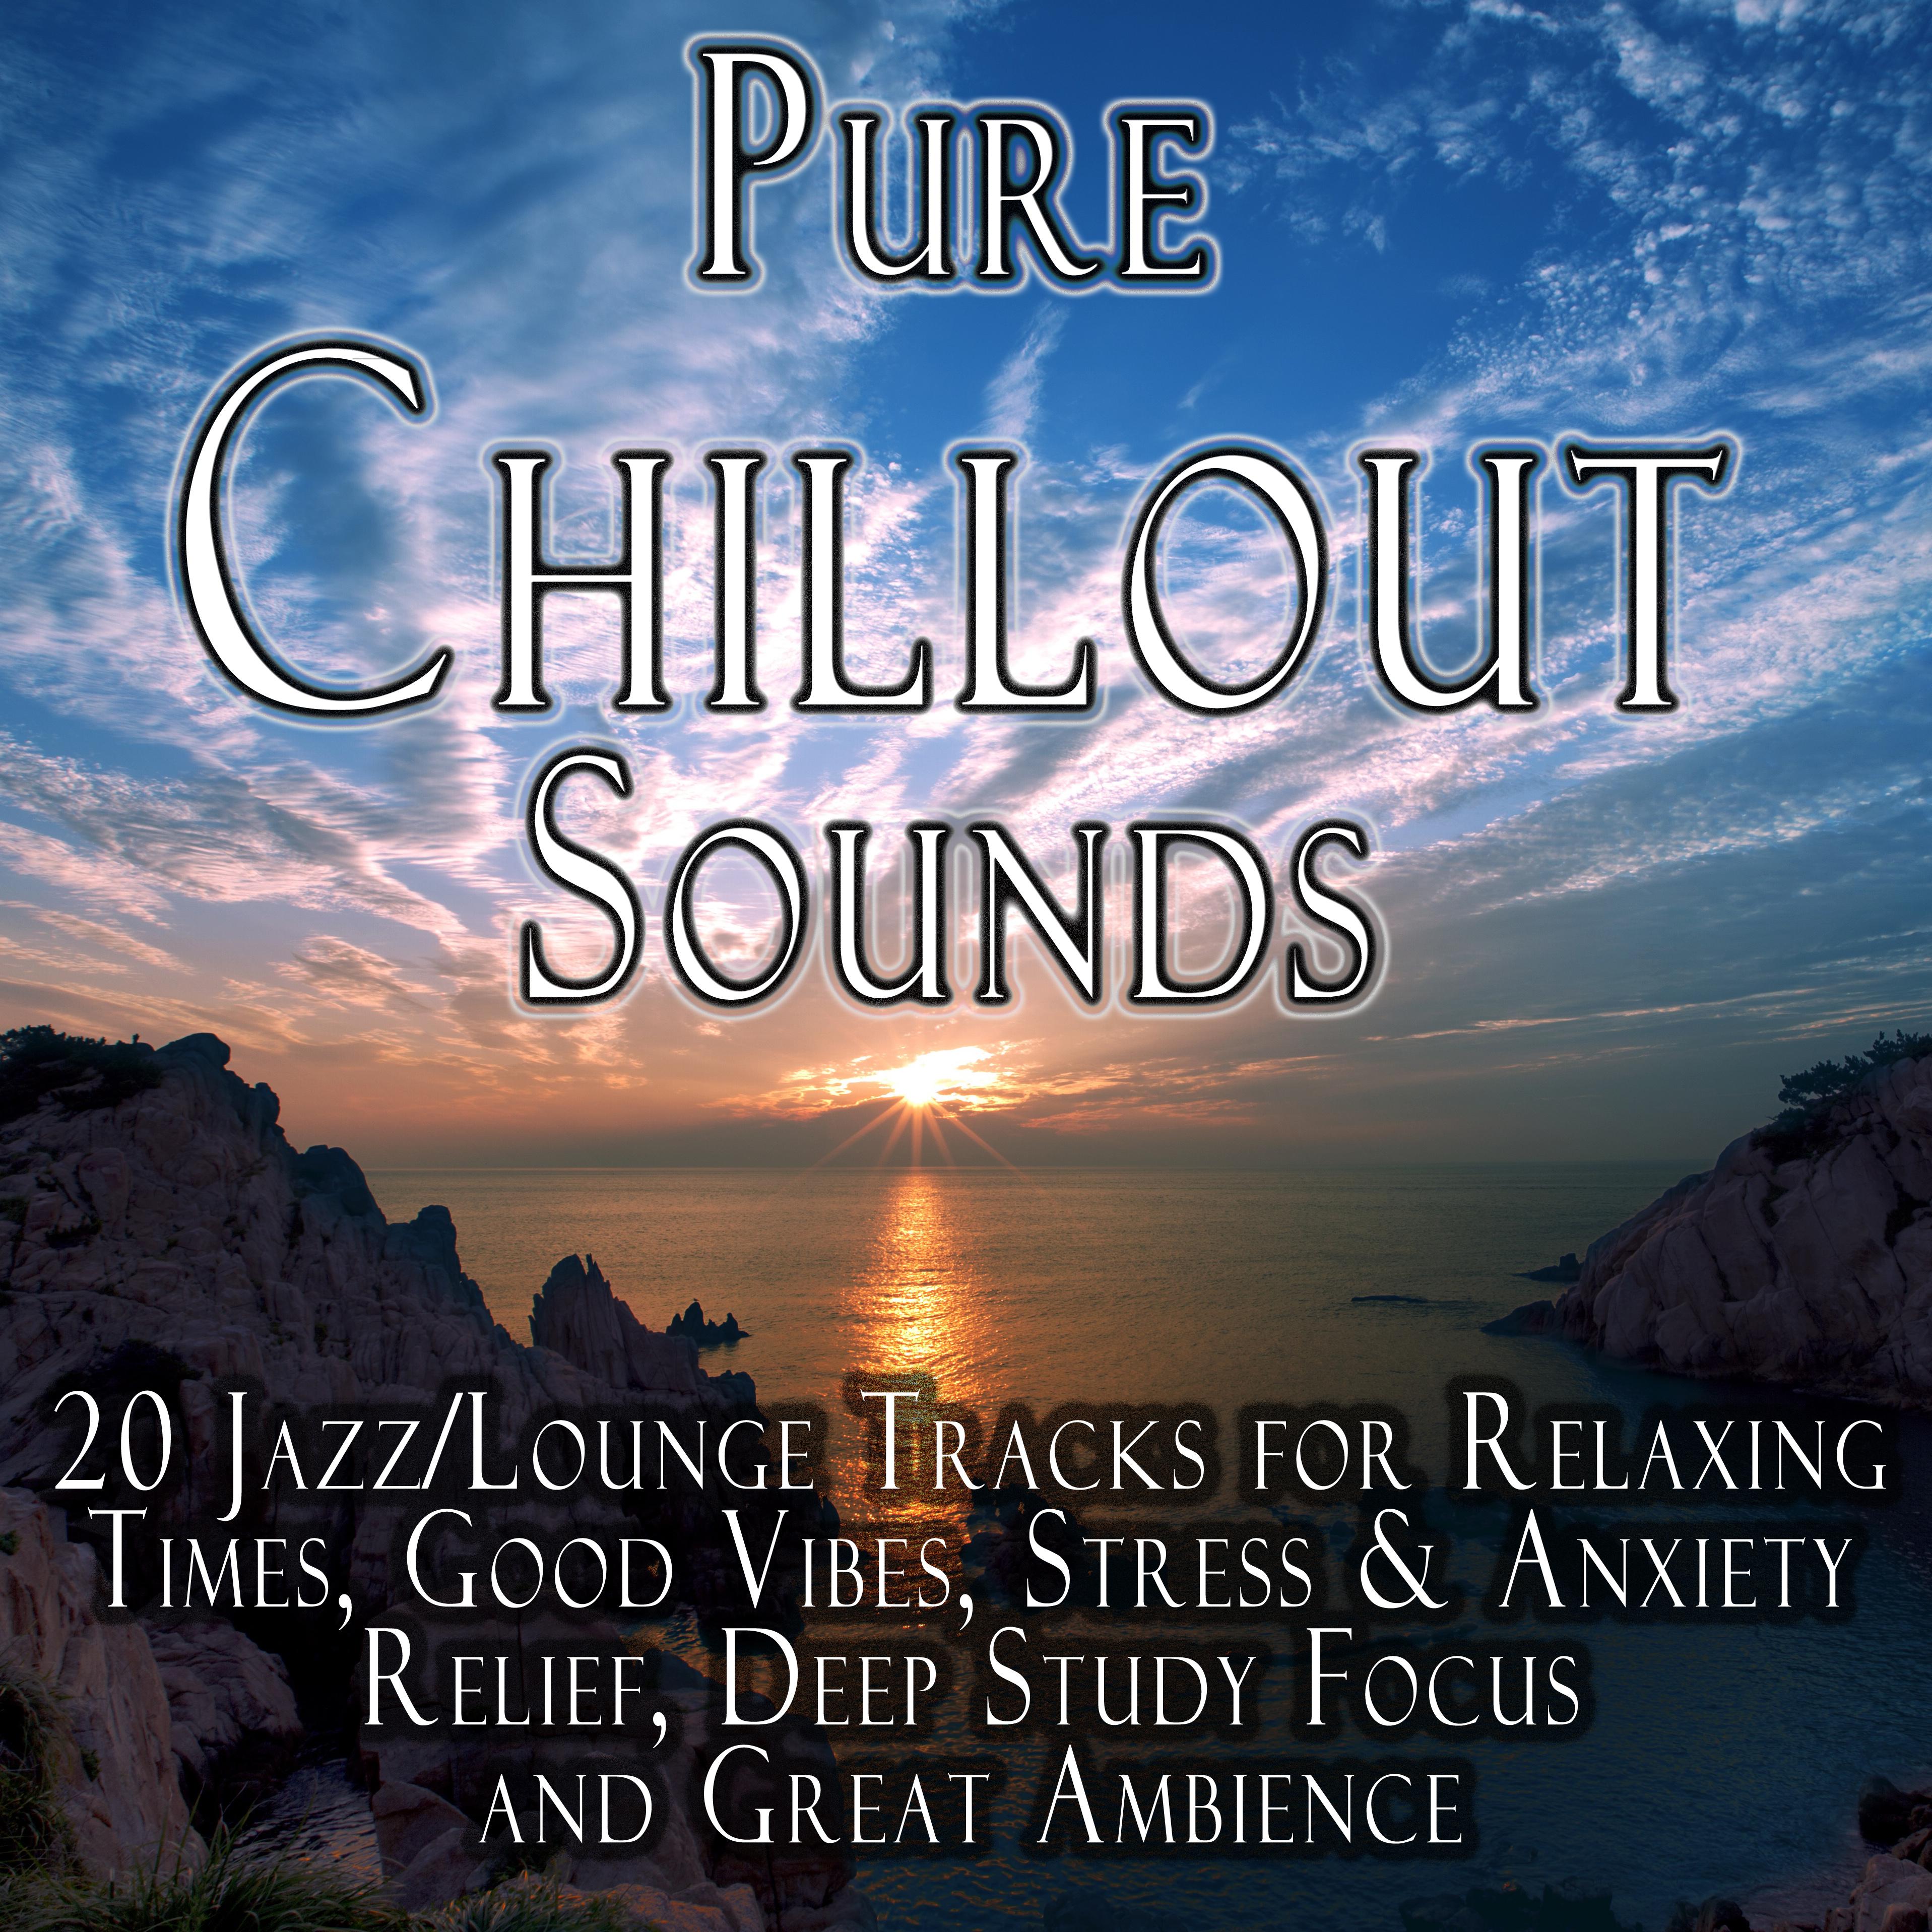 Pure Chillout Sounds - 20 Ambient/Lounge Tracks for Relaxing Times, Good Vibes, Stress & Anxiety Relief, Deep Study Focus and Great Ambience